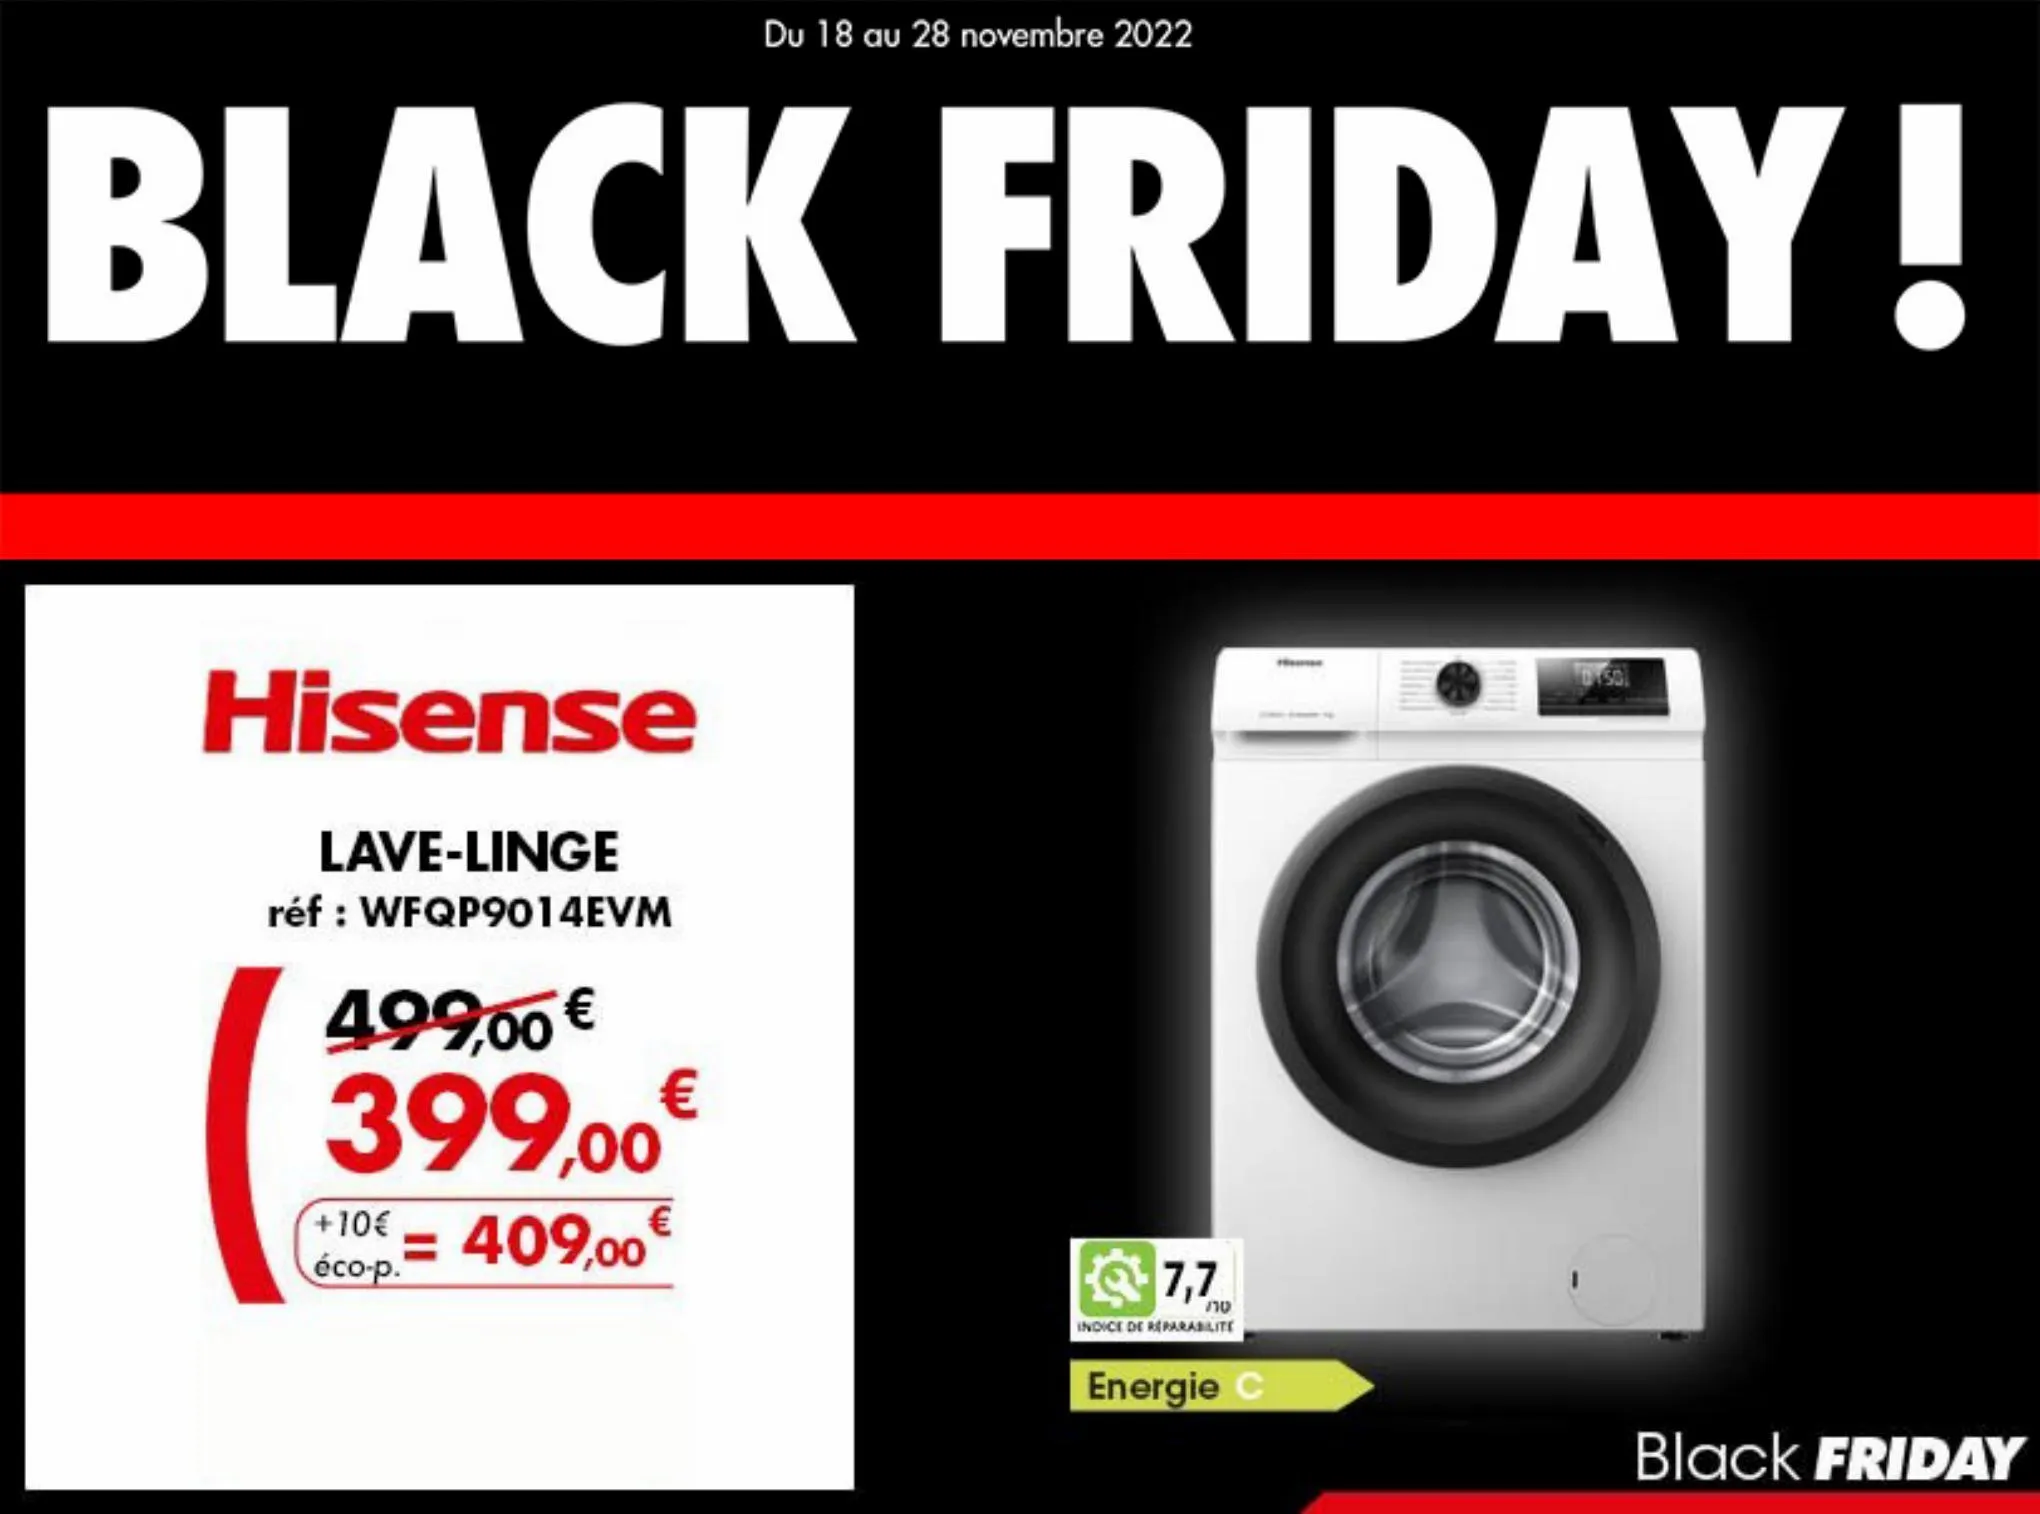 Catalogue Black Friday offres!, page 00002